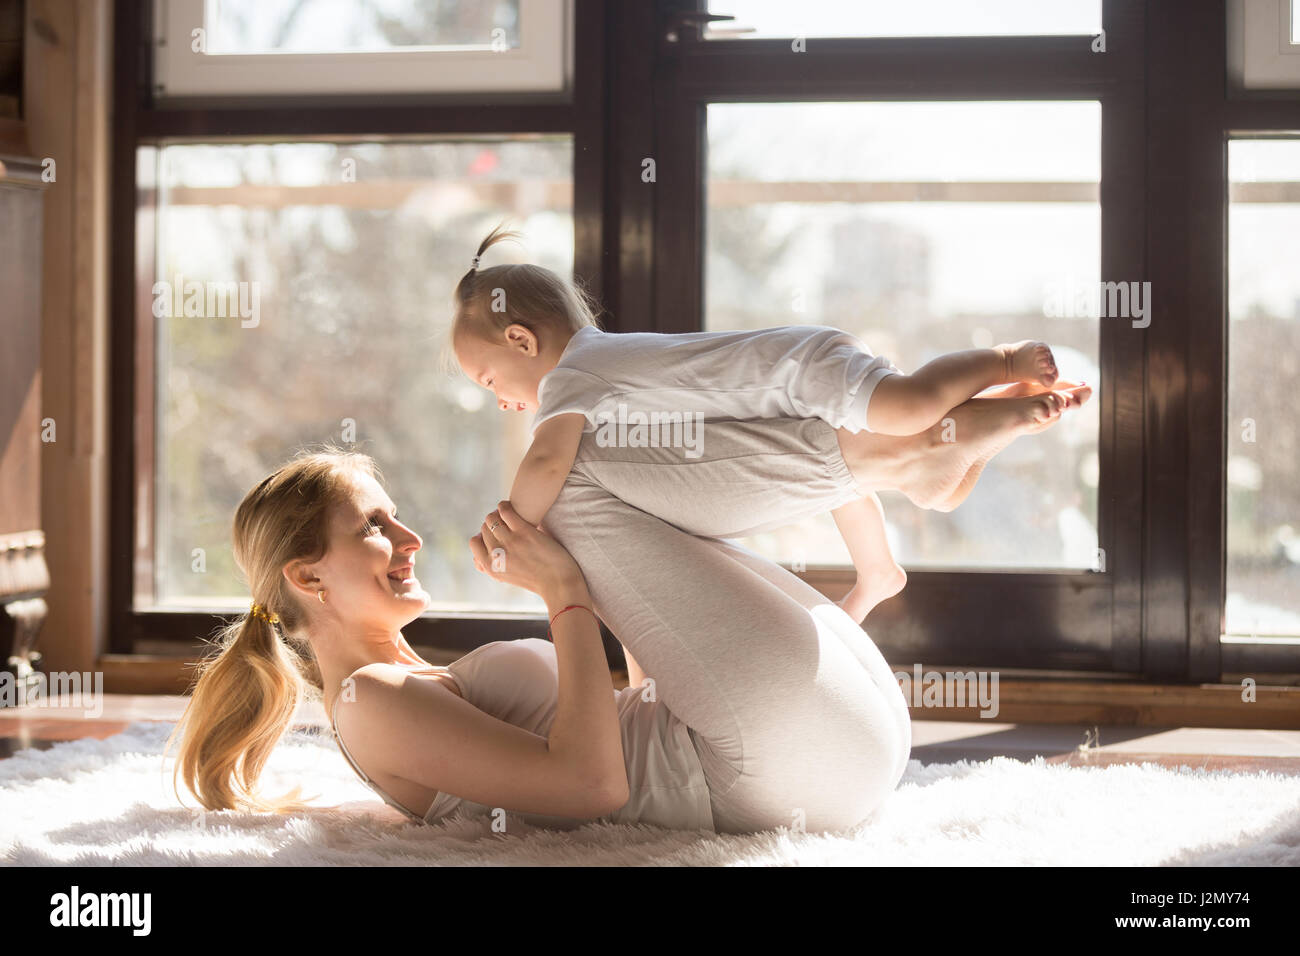 Young sporty mother and baby girl working out, exercising together at home, parent and child healthy development, game playing, fitness and relaxation Stock Photo